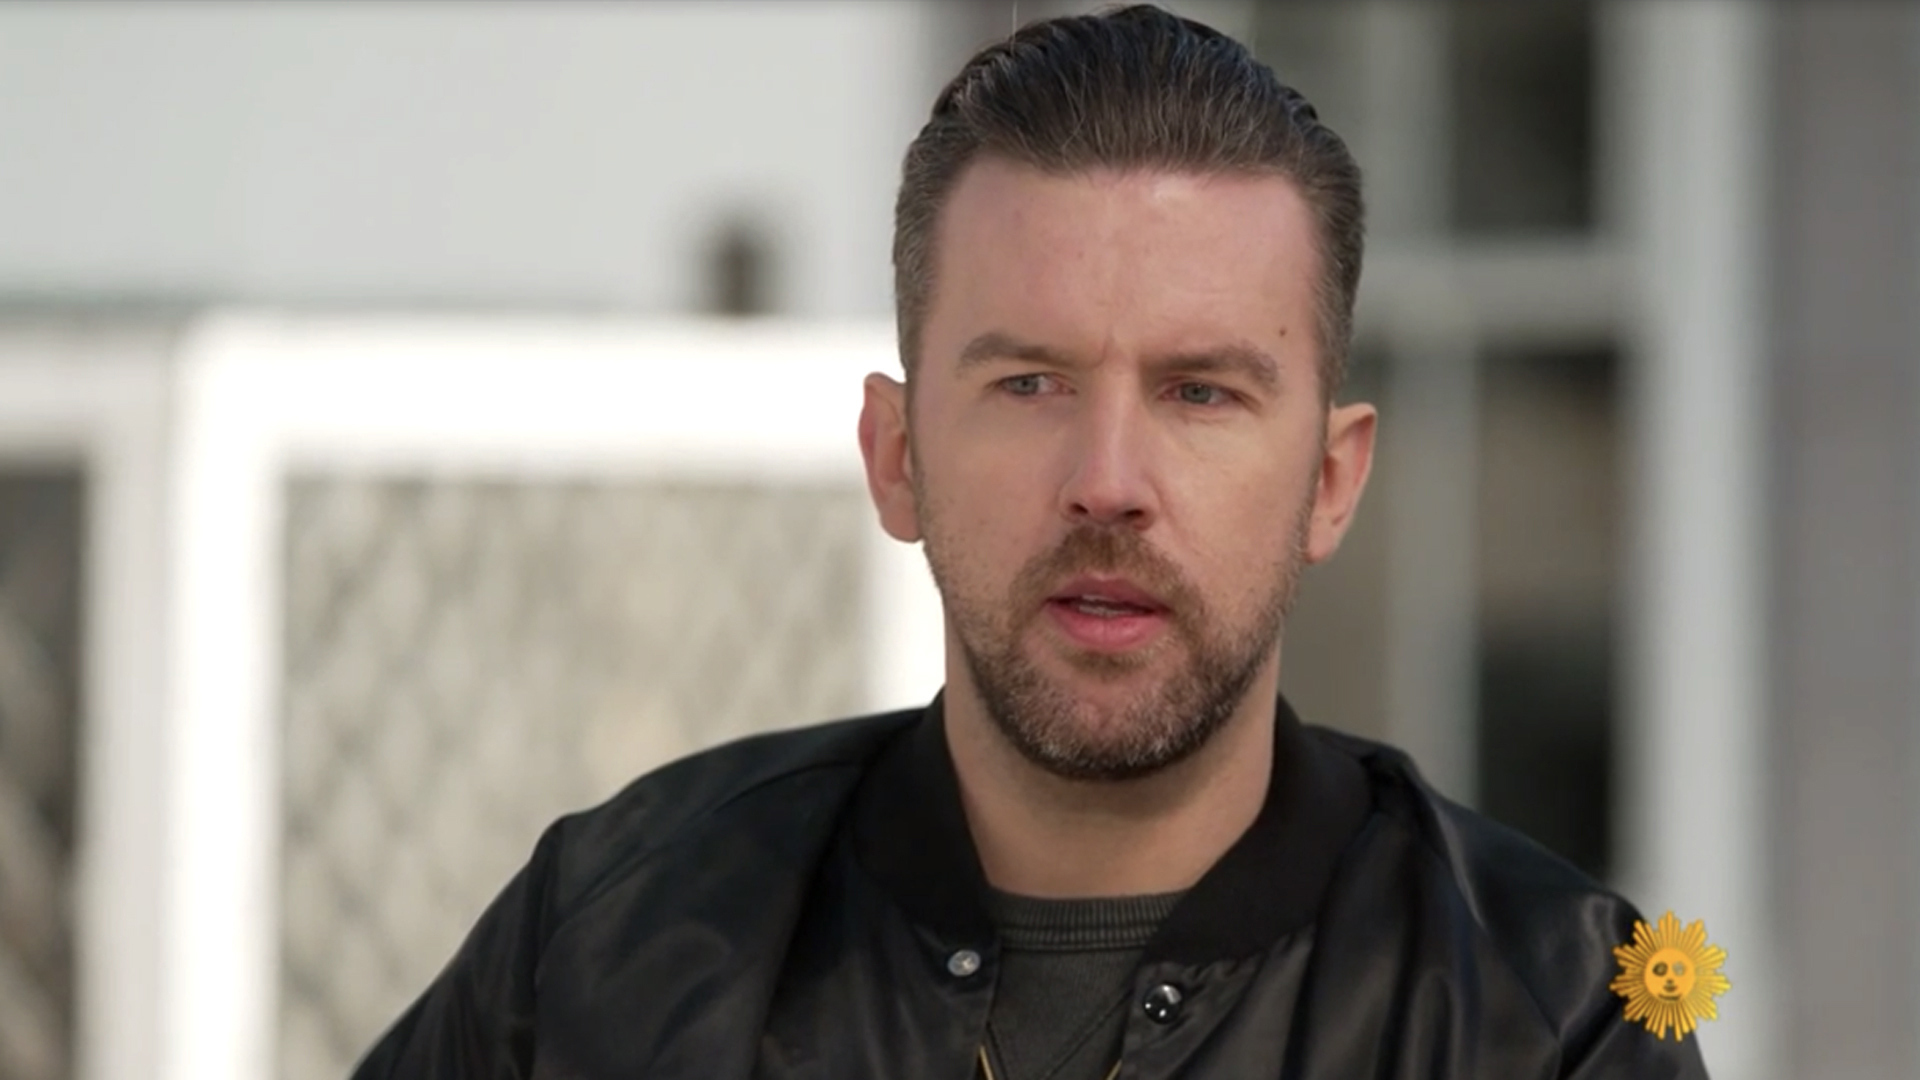 Watch Sunday Morning TJ Osborne, of Brothers Osborne, on coming out